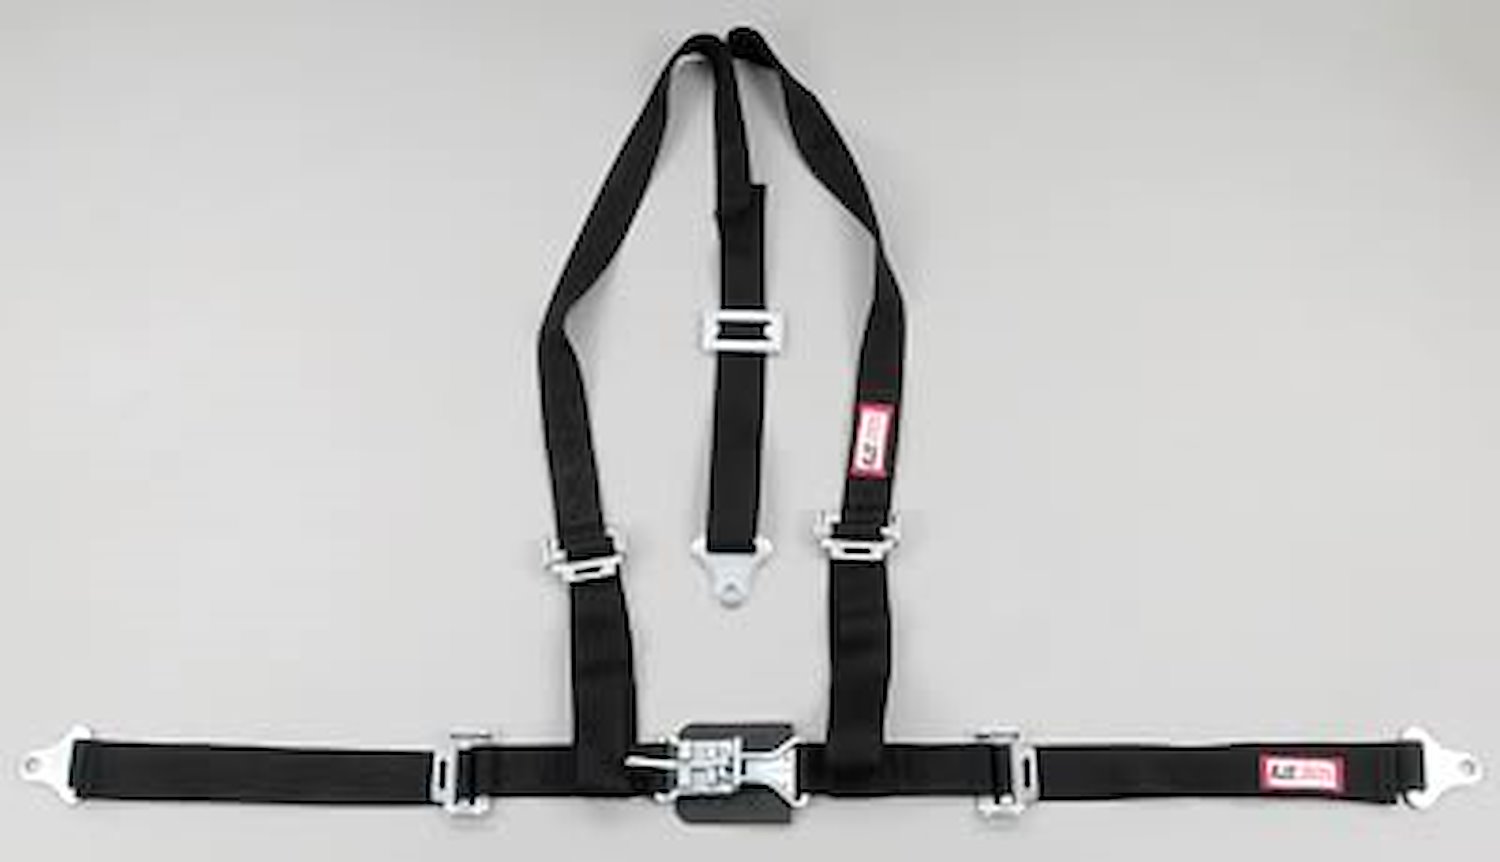 NON-SFI L&L HARNESS 2 PULL DOWN Lap Belt SEWN IN 2 S.H. V ROLL BAR Mount w/STERNUM STRAP ALL WRAP ENDS BLACK